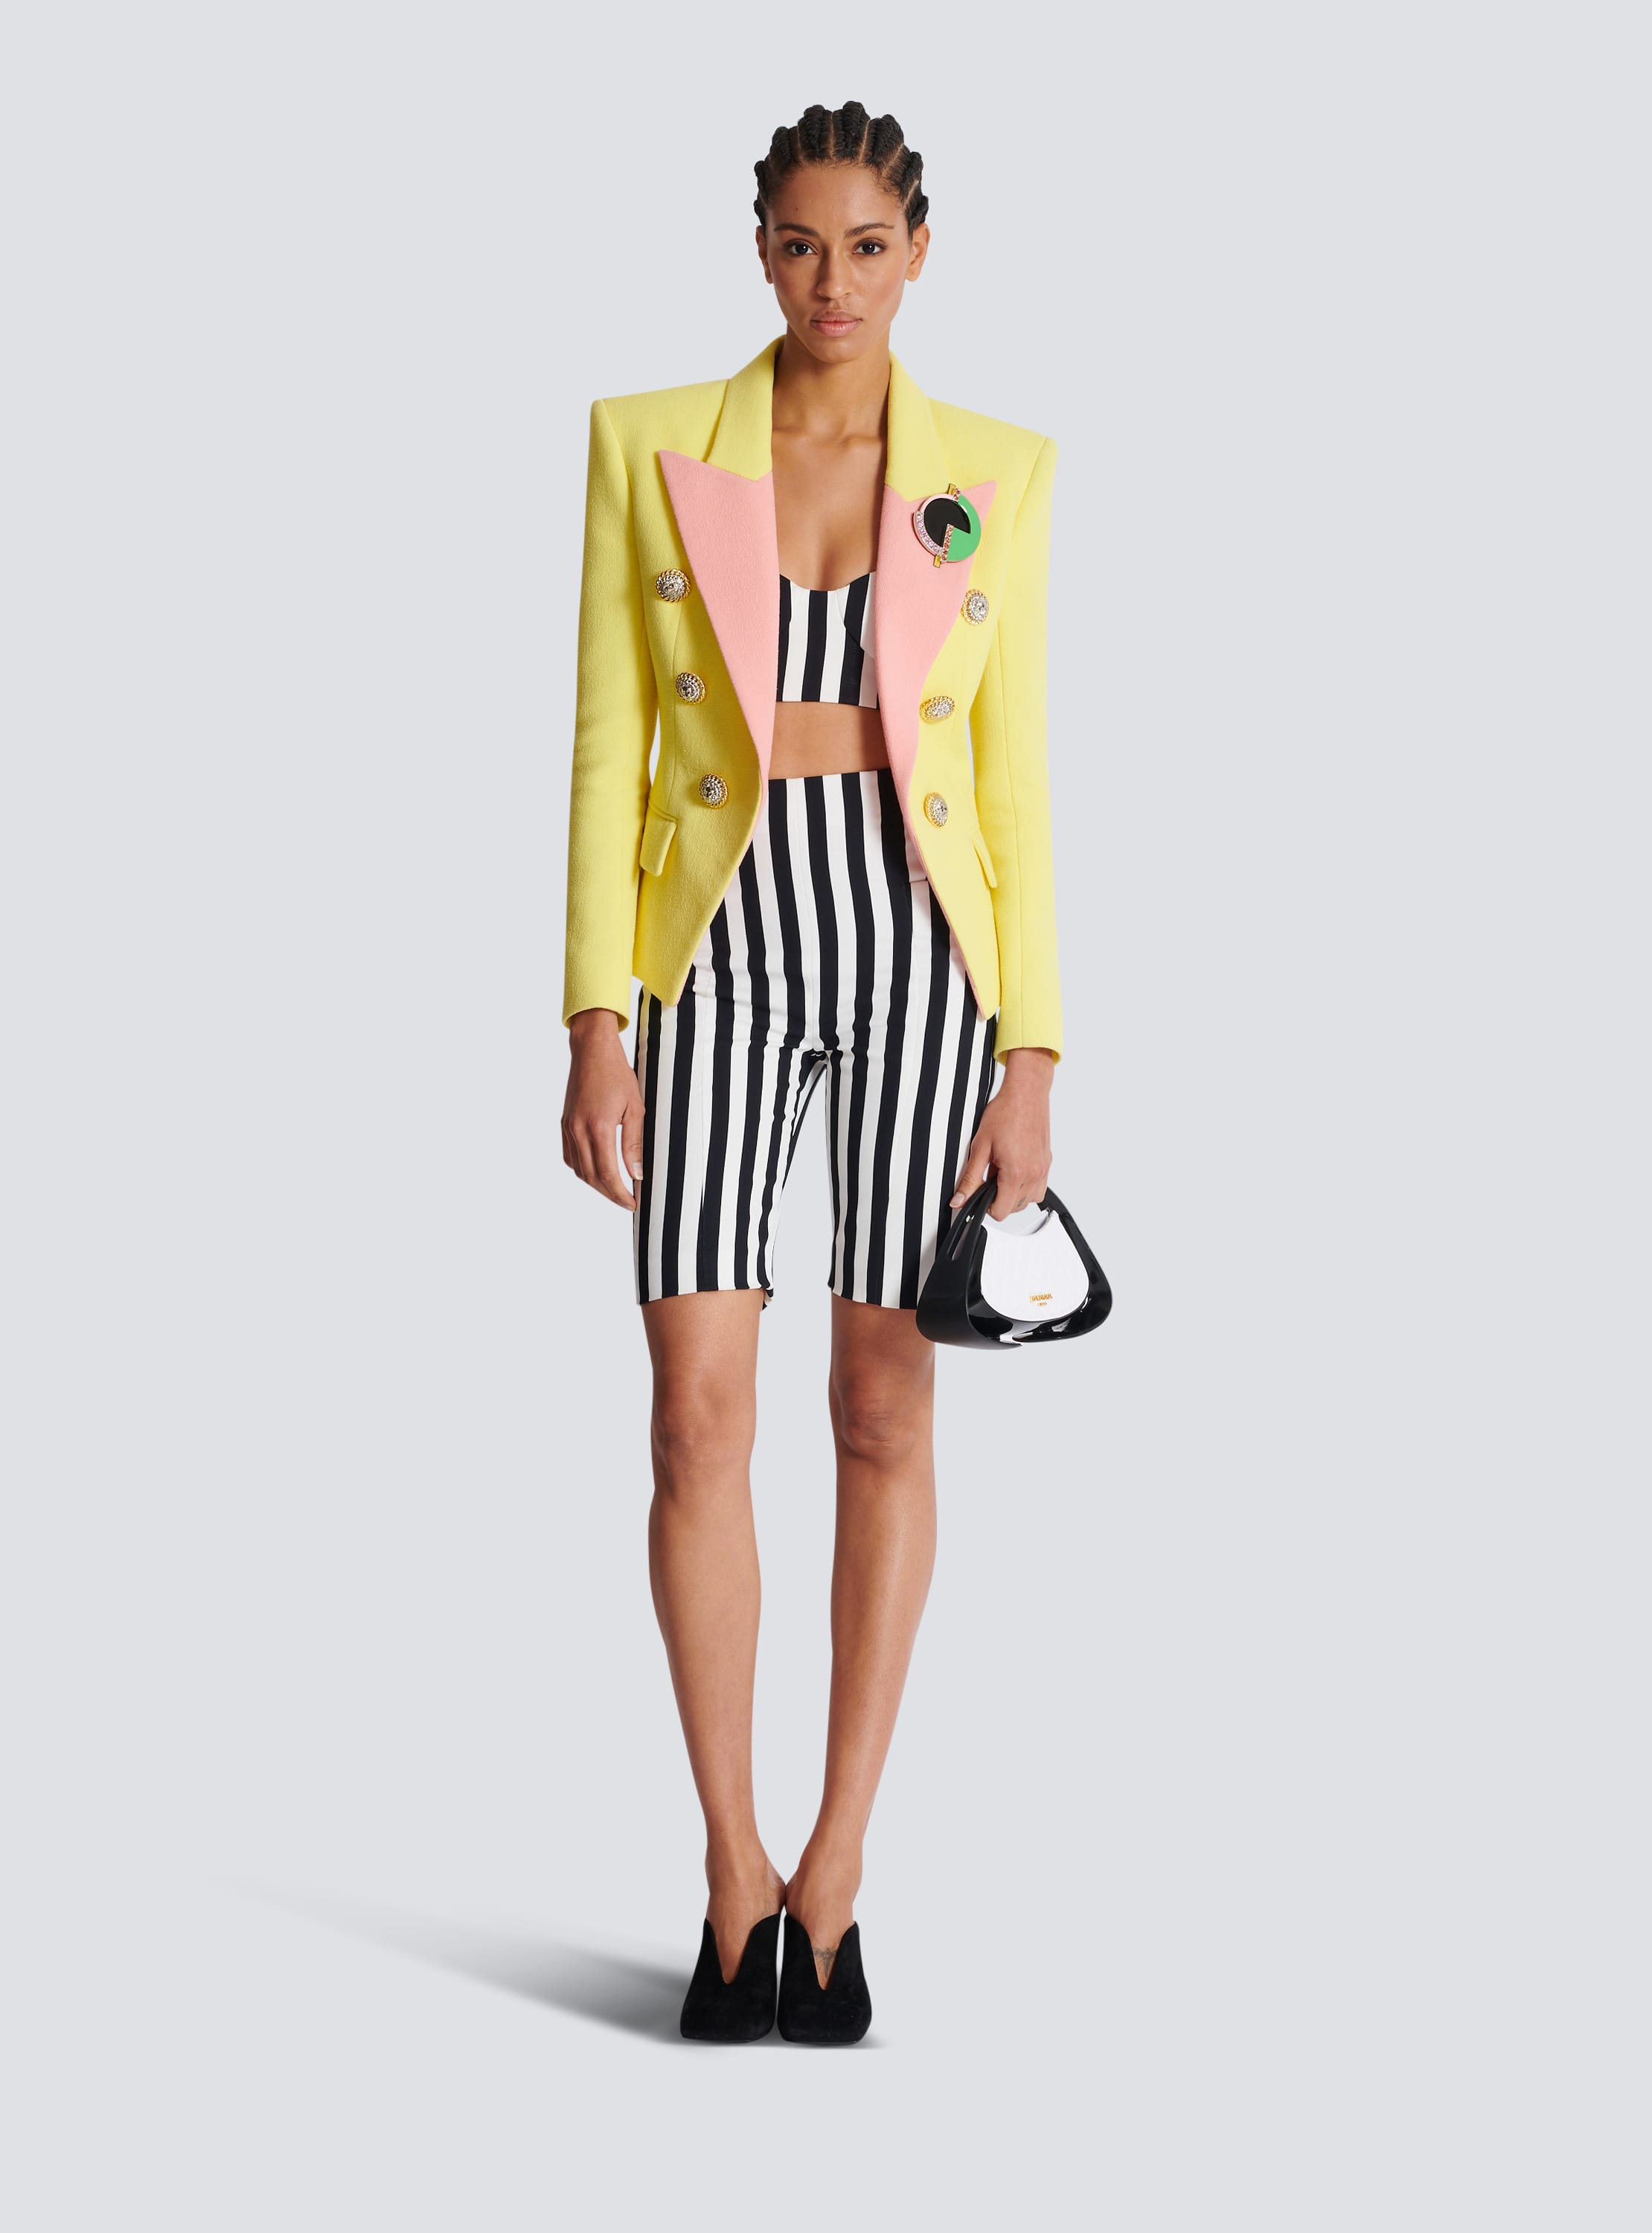 6-button double crepe two-tone jacket